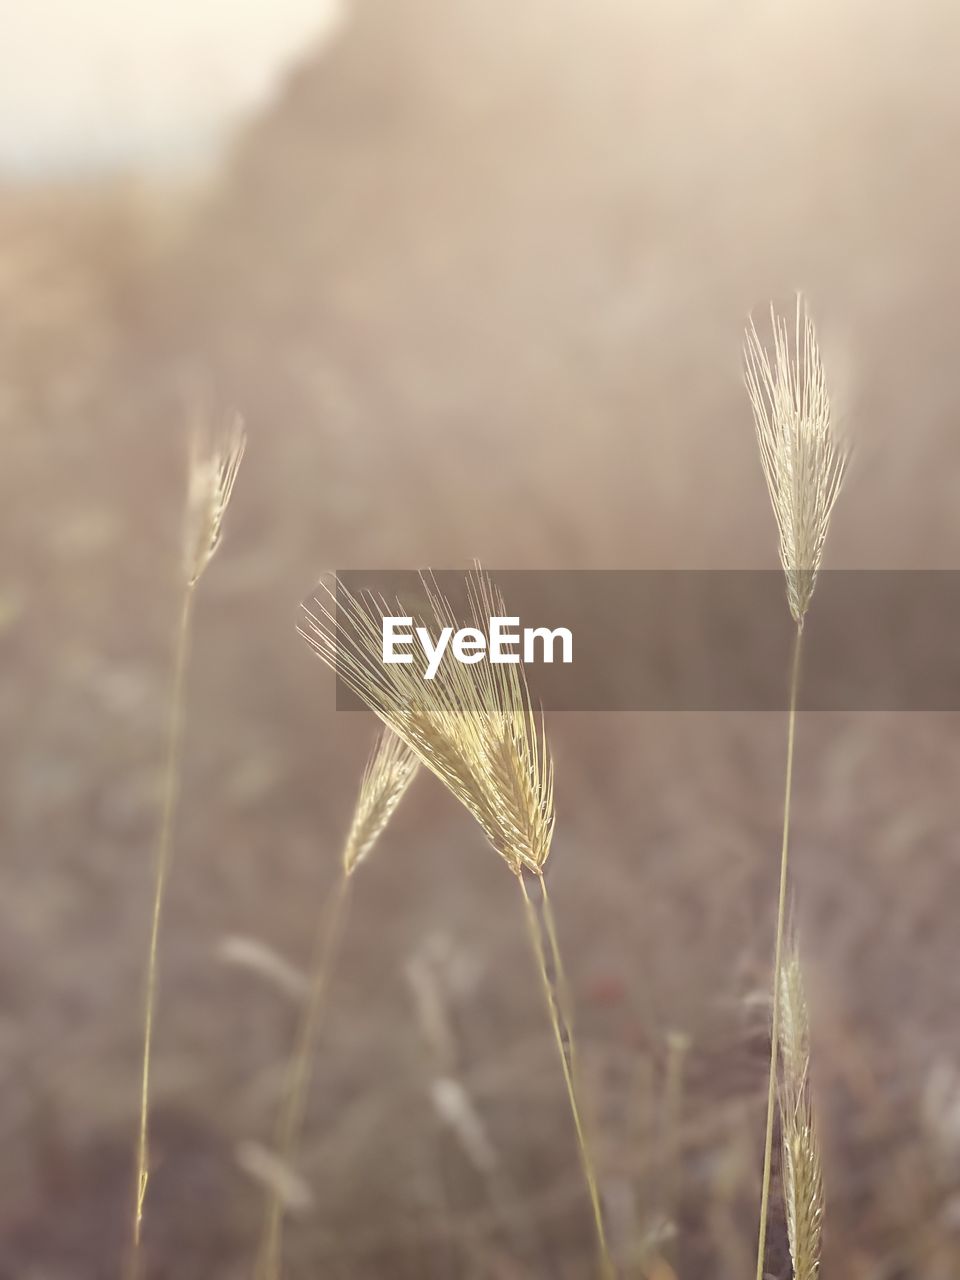 plant, nature, cereal plant, grass, close-up, field, growth, agriculture, crop, land, rural scene, beauty in nature, focus on foreground, landscape, no people, wheat, prairie, plant stem, tranquility, summer, flower, outdoors, macro photography, barley, sunlight, selective focus, environment, freshness, day, leaf, food, seed, farm, sky, dry, food and drink, meadow, copy space, plain